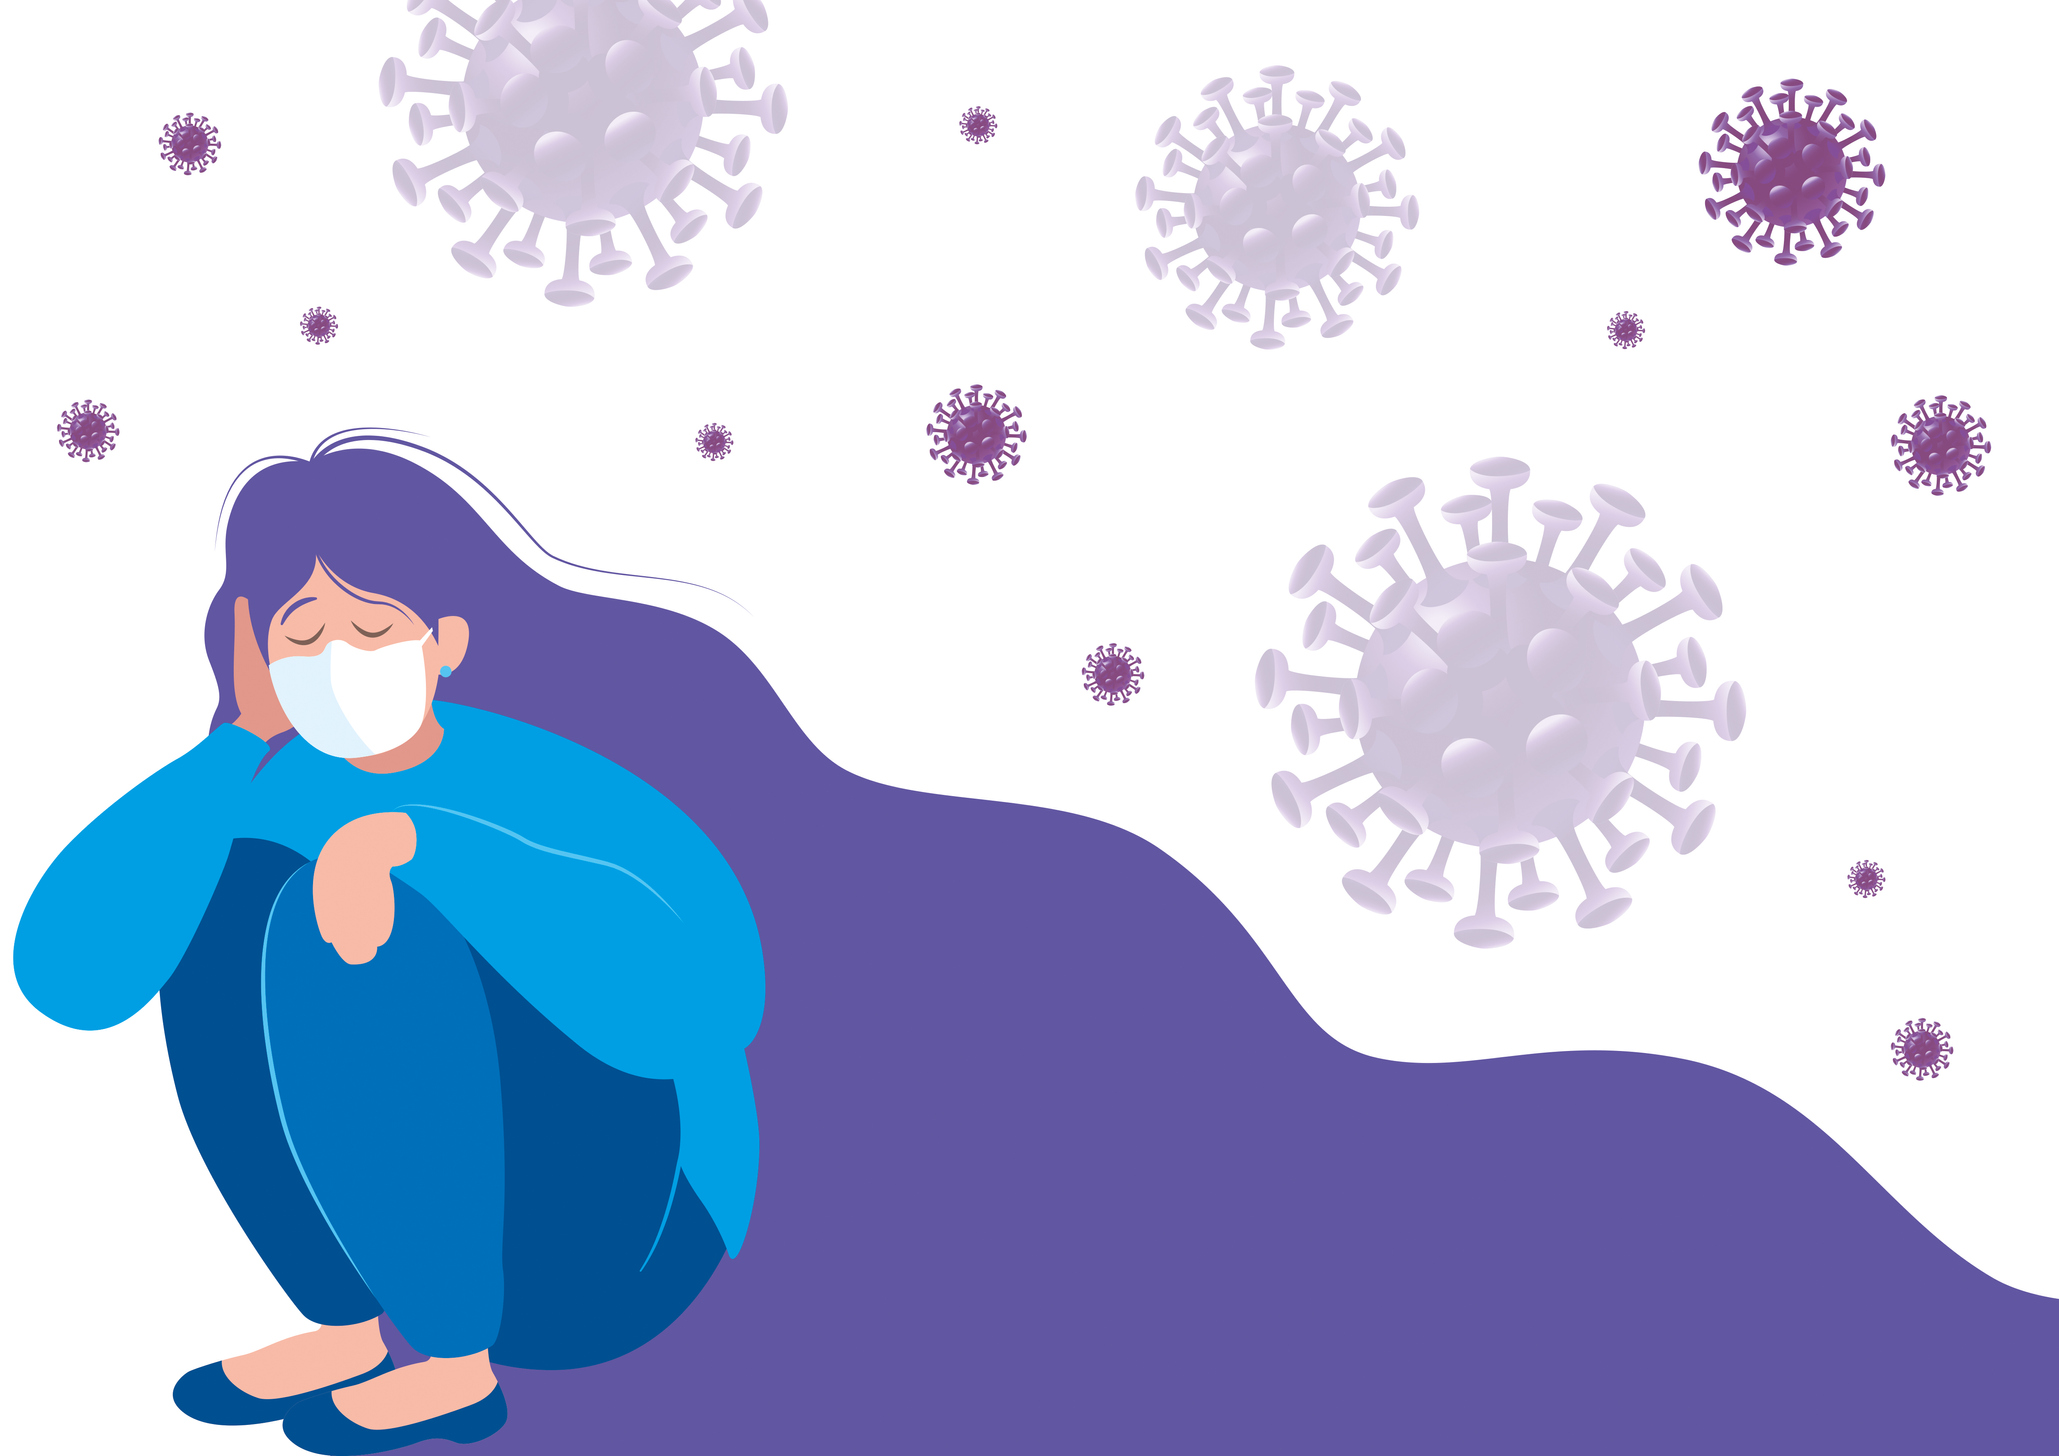 Vector Illustration of a Sad Girl in Solitude from Social Distancing in COVID-19 coronavirus crisis, anxiety from virus infection, virus pathogens.